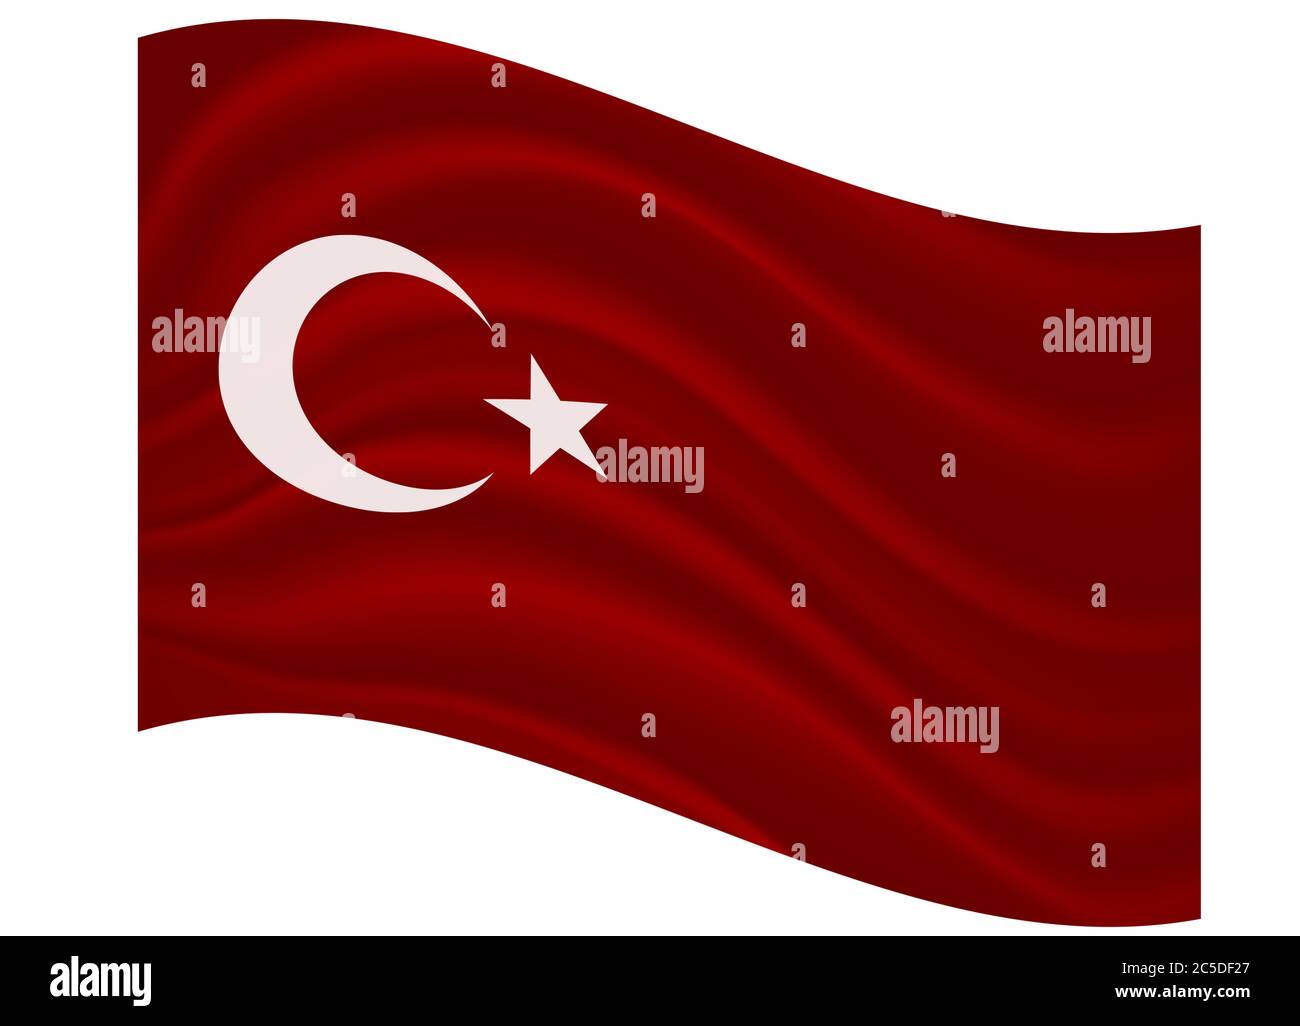 Turkey flag with white crescent and star on red color background. Stock Vector